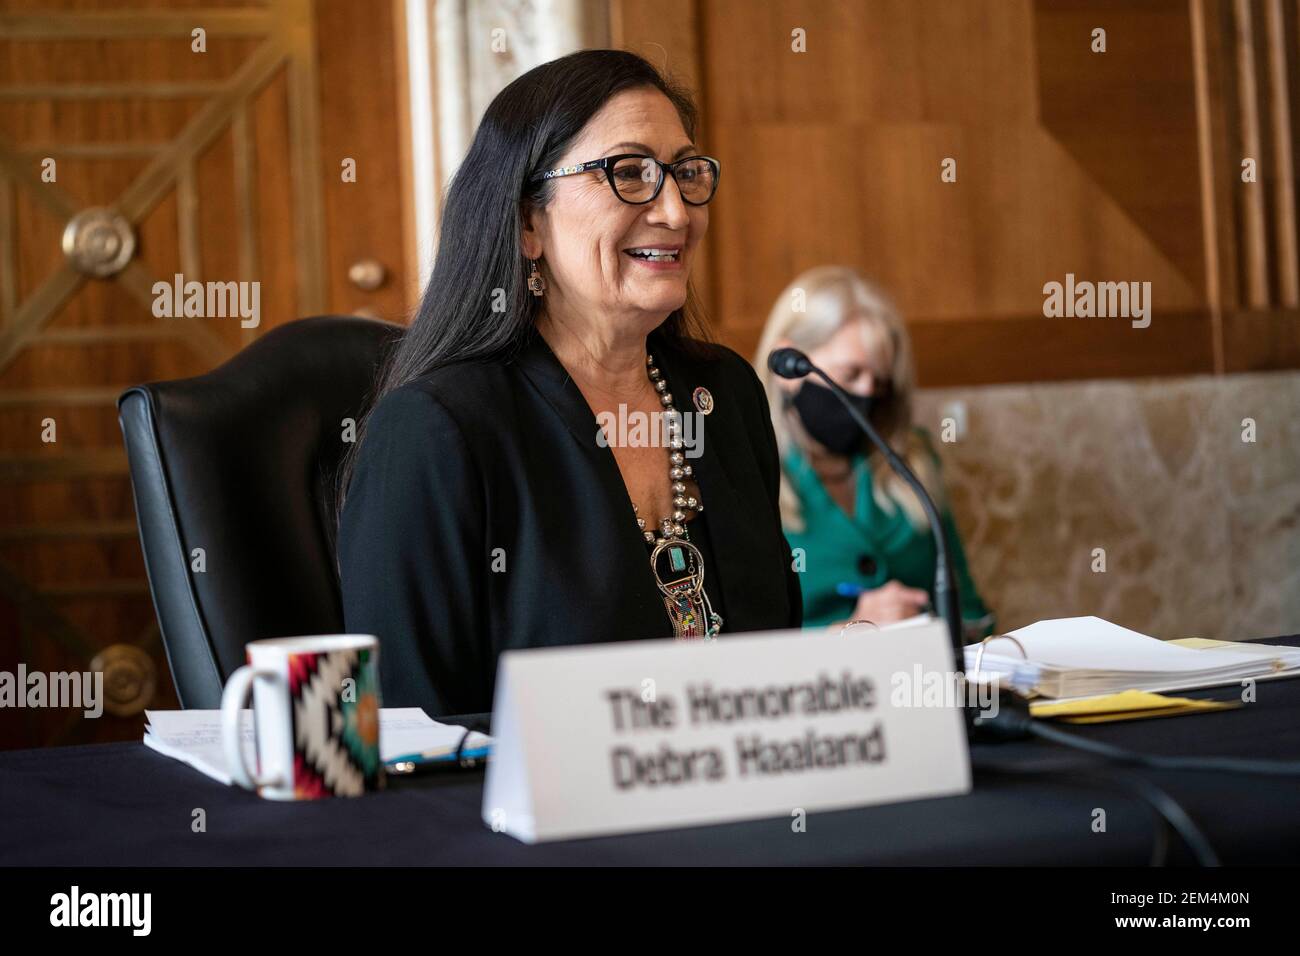 Representative Deb Haaland, a Democrat from New Mexico and secretary of the interior nominee for U.S. President Joe Biden, speaks during a Senate Energy and Natural Resources Committee confirmation hearing in Washington, D.C., U.S., on Wednesday, Feb. 24, 2021. Haaland downplayed her past opposition to fracking during a heated hearing yesterday as she sought to reassure senators worried she would clamp down on fossil fuel development. Photo by Sarah Silbiger/Pool/Sipa USA) Stock Photo